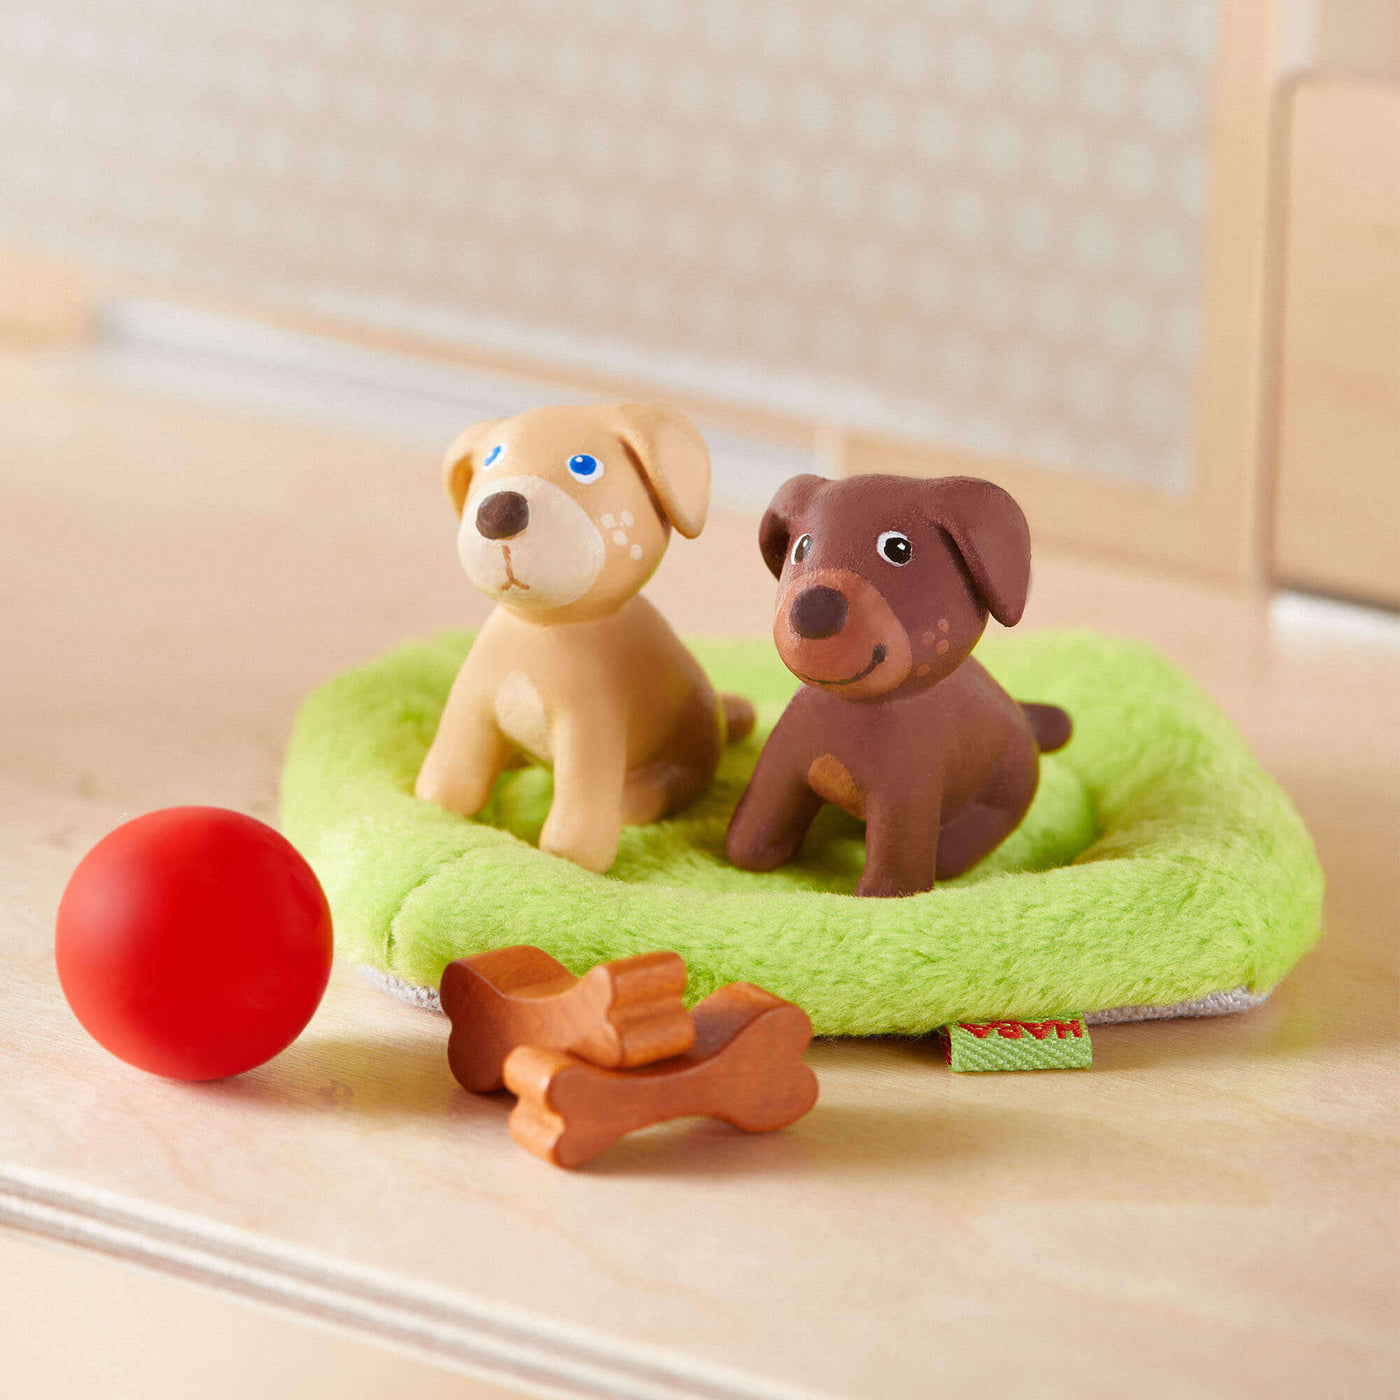 HABA Little Friends Puppy Love Playset with 2 puppies sitting on green bed, red ball, and 2 bones